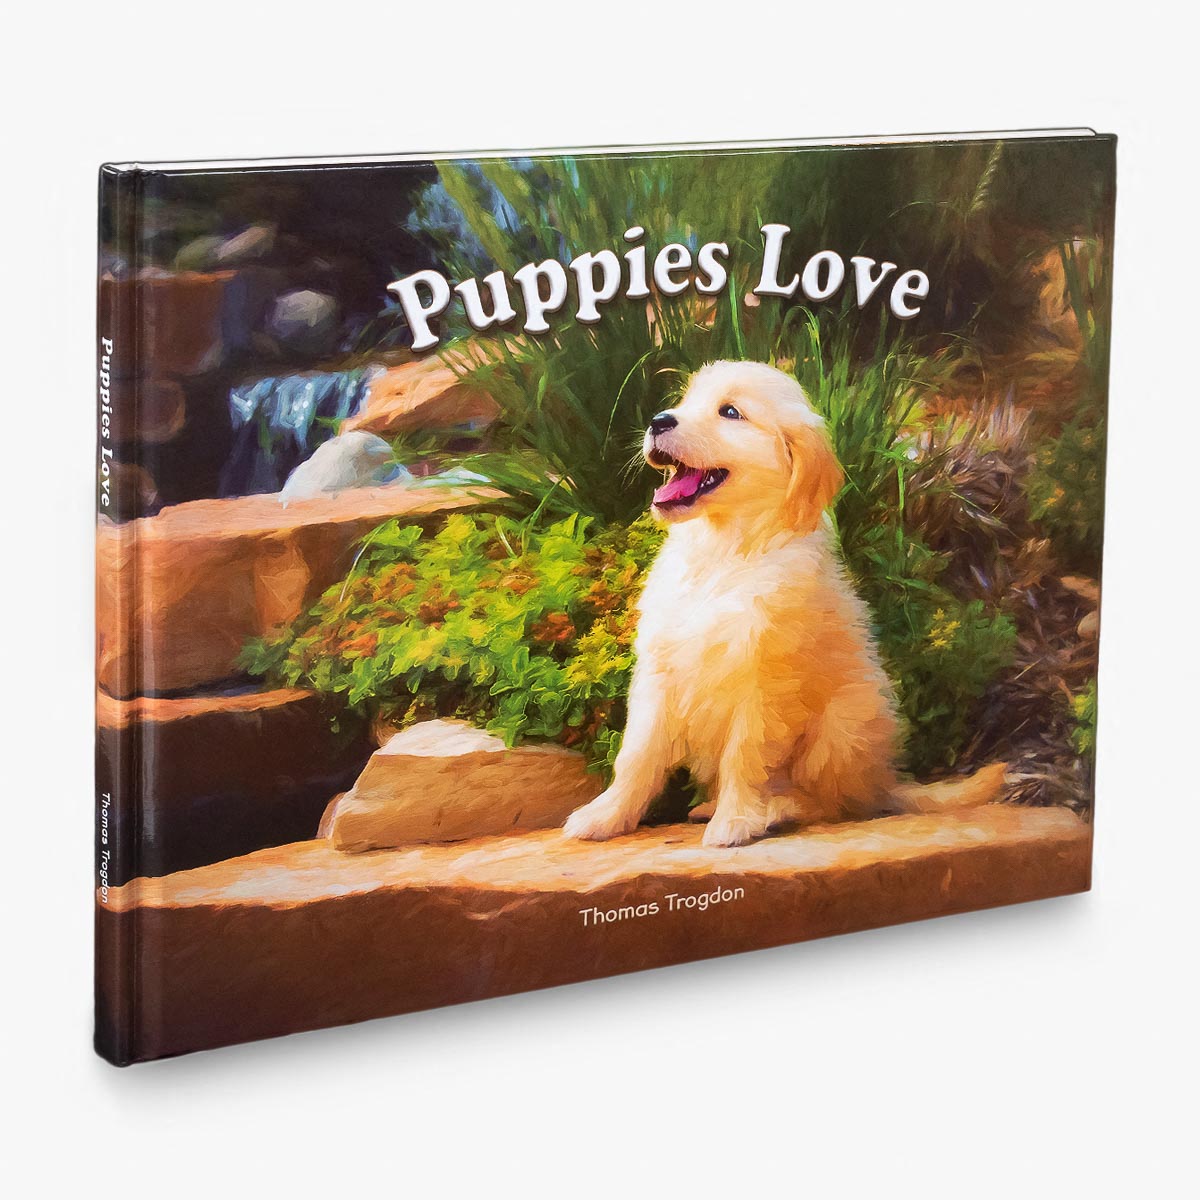 Puppies Love Book Cover Featured Image